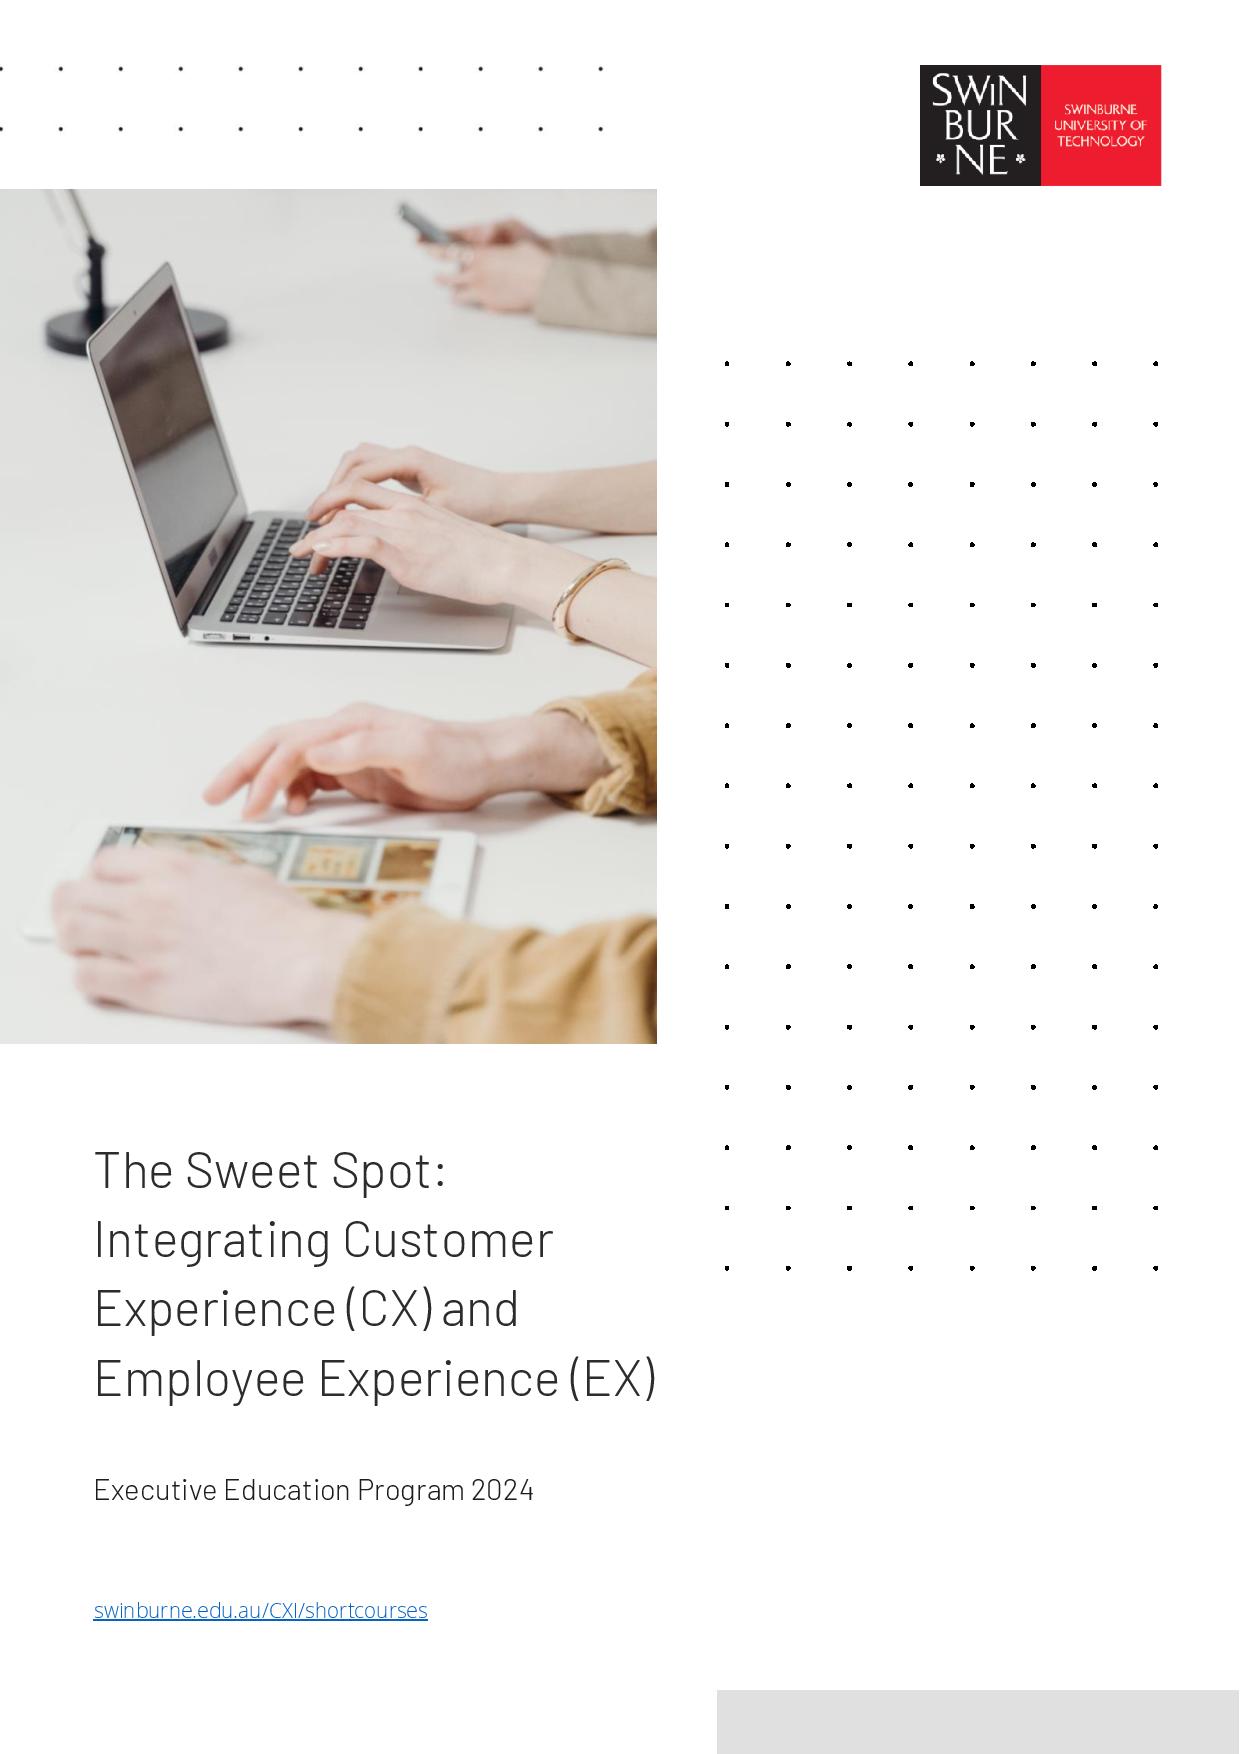 The Sweet Spot: Integrating CX and EX